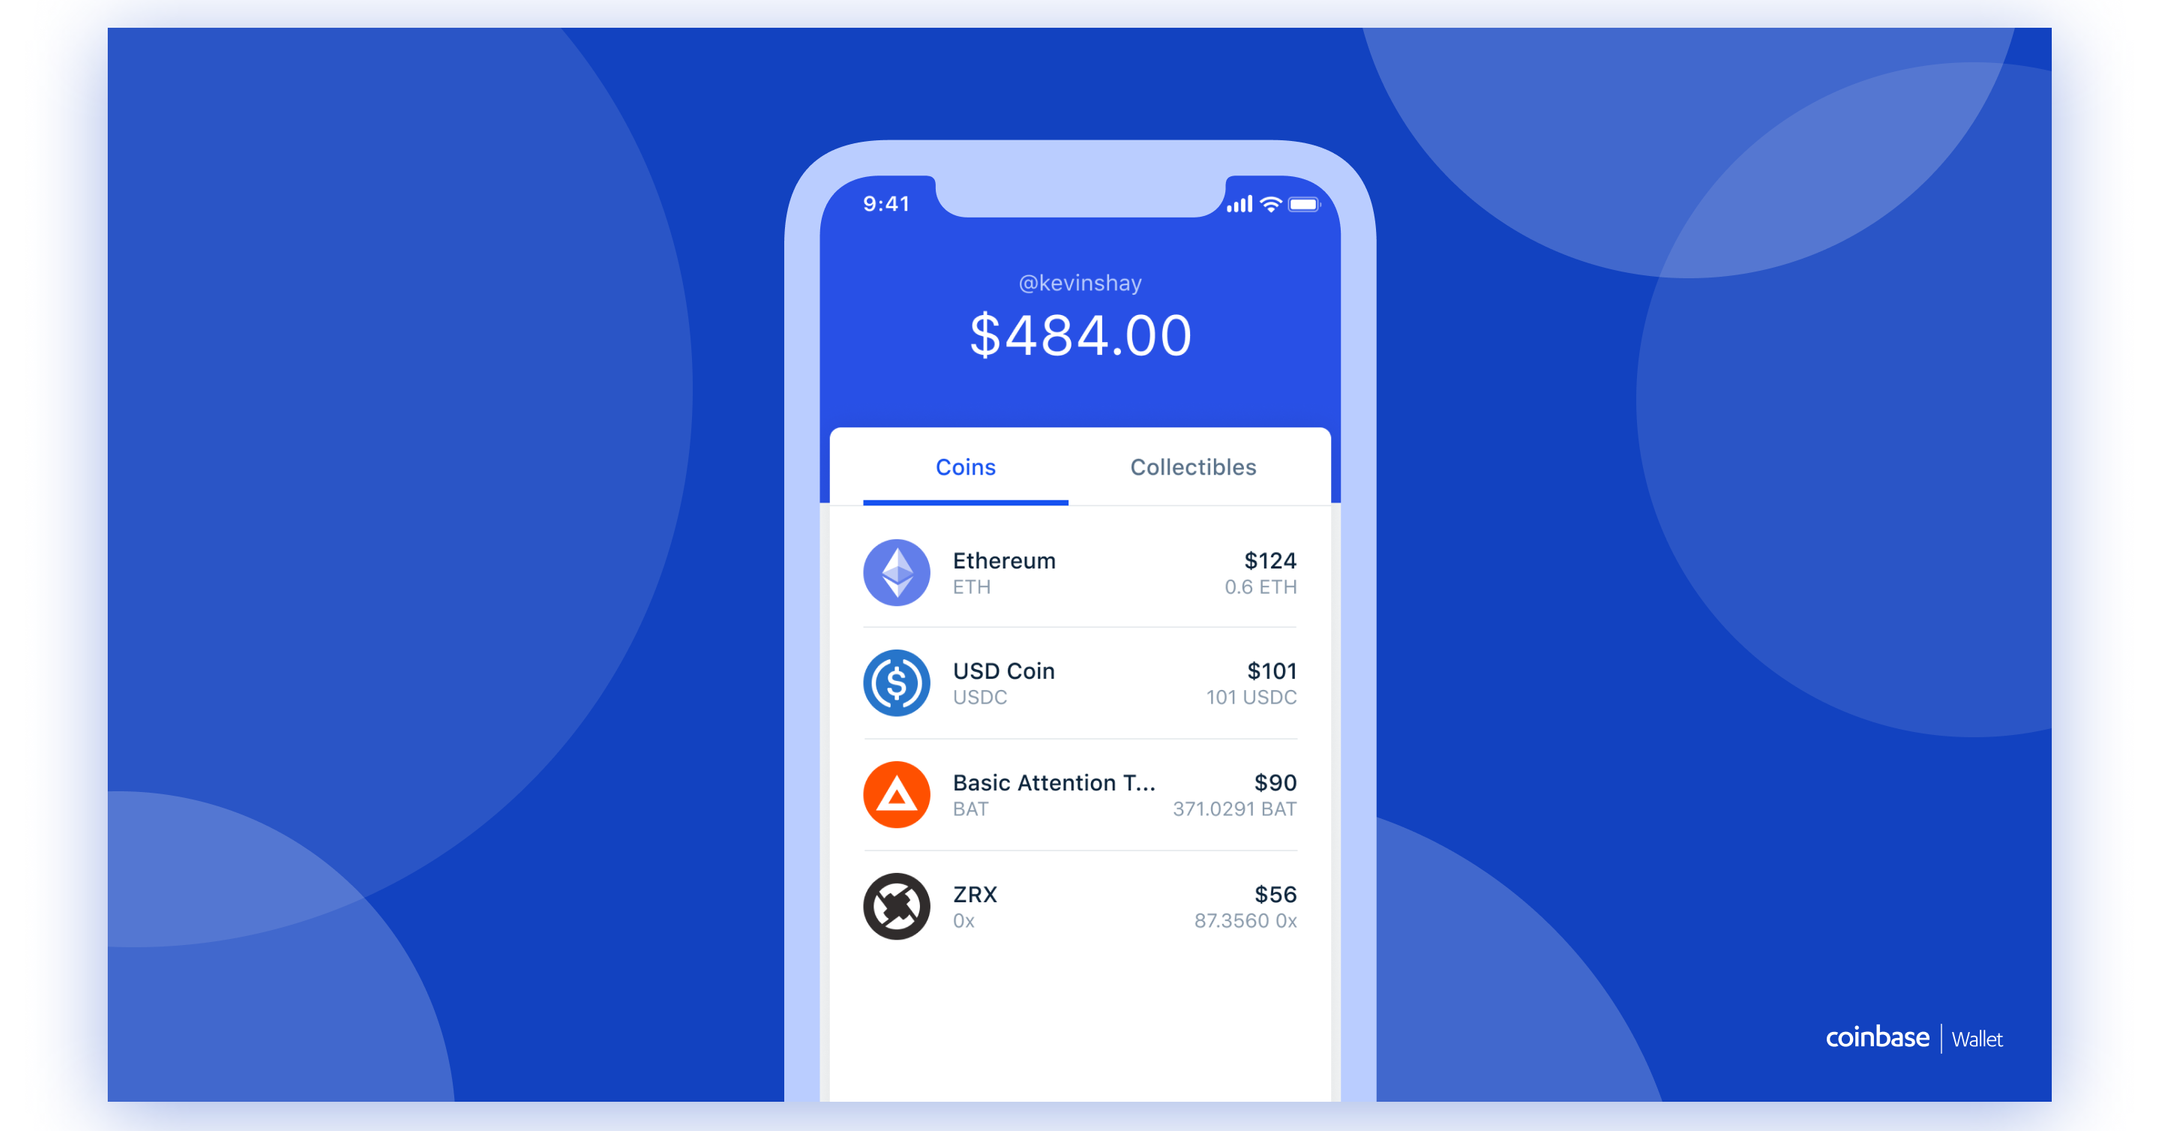 nfts in coinbase wallet